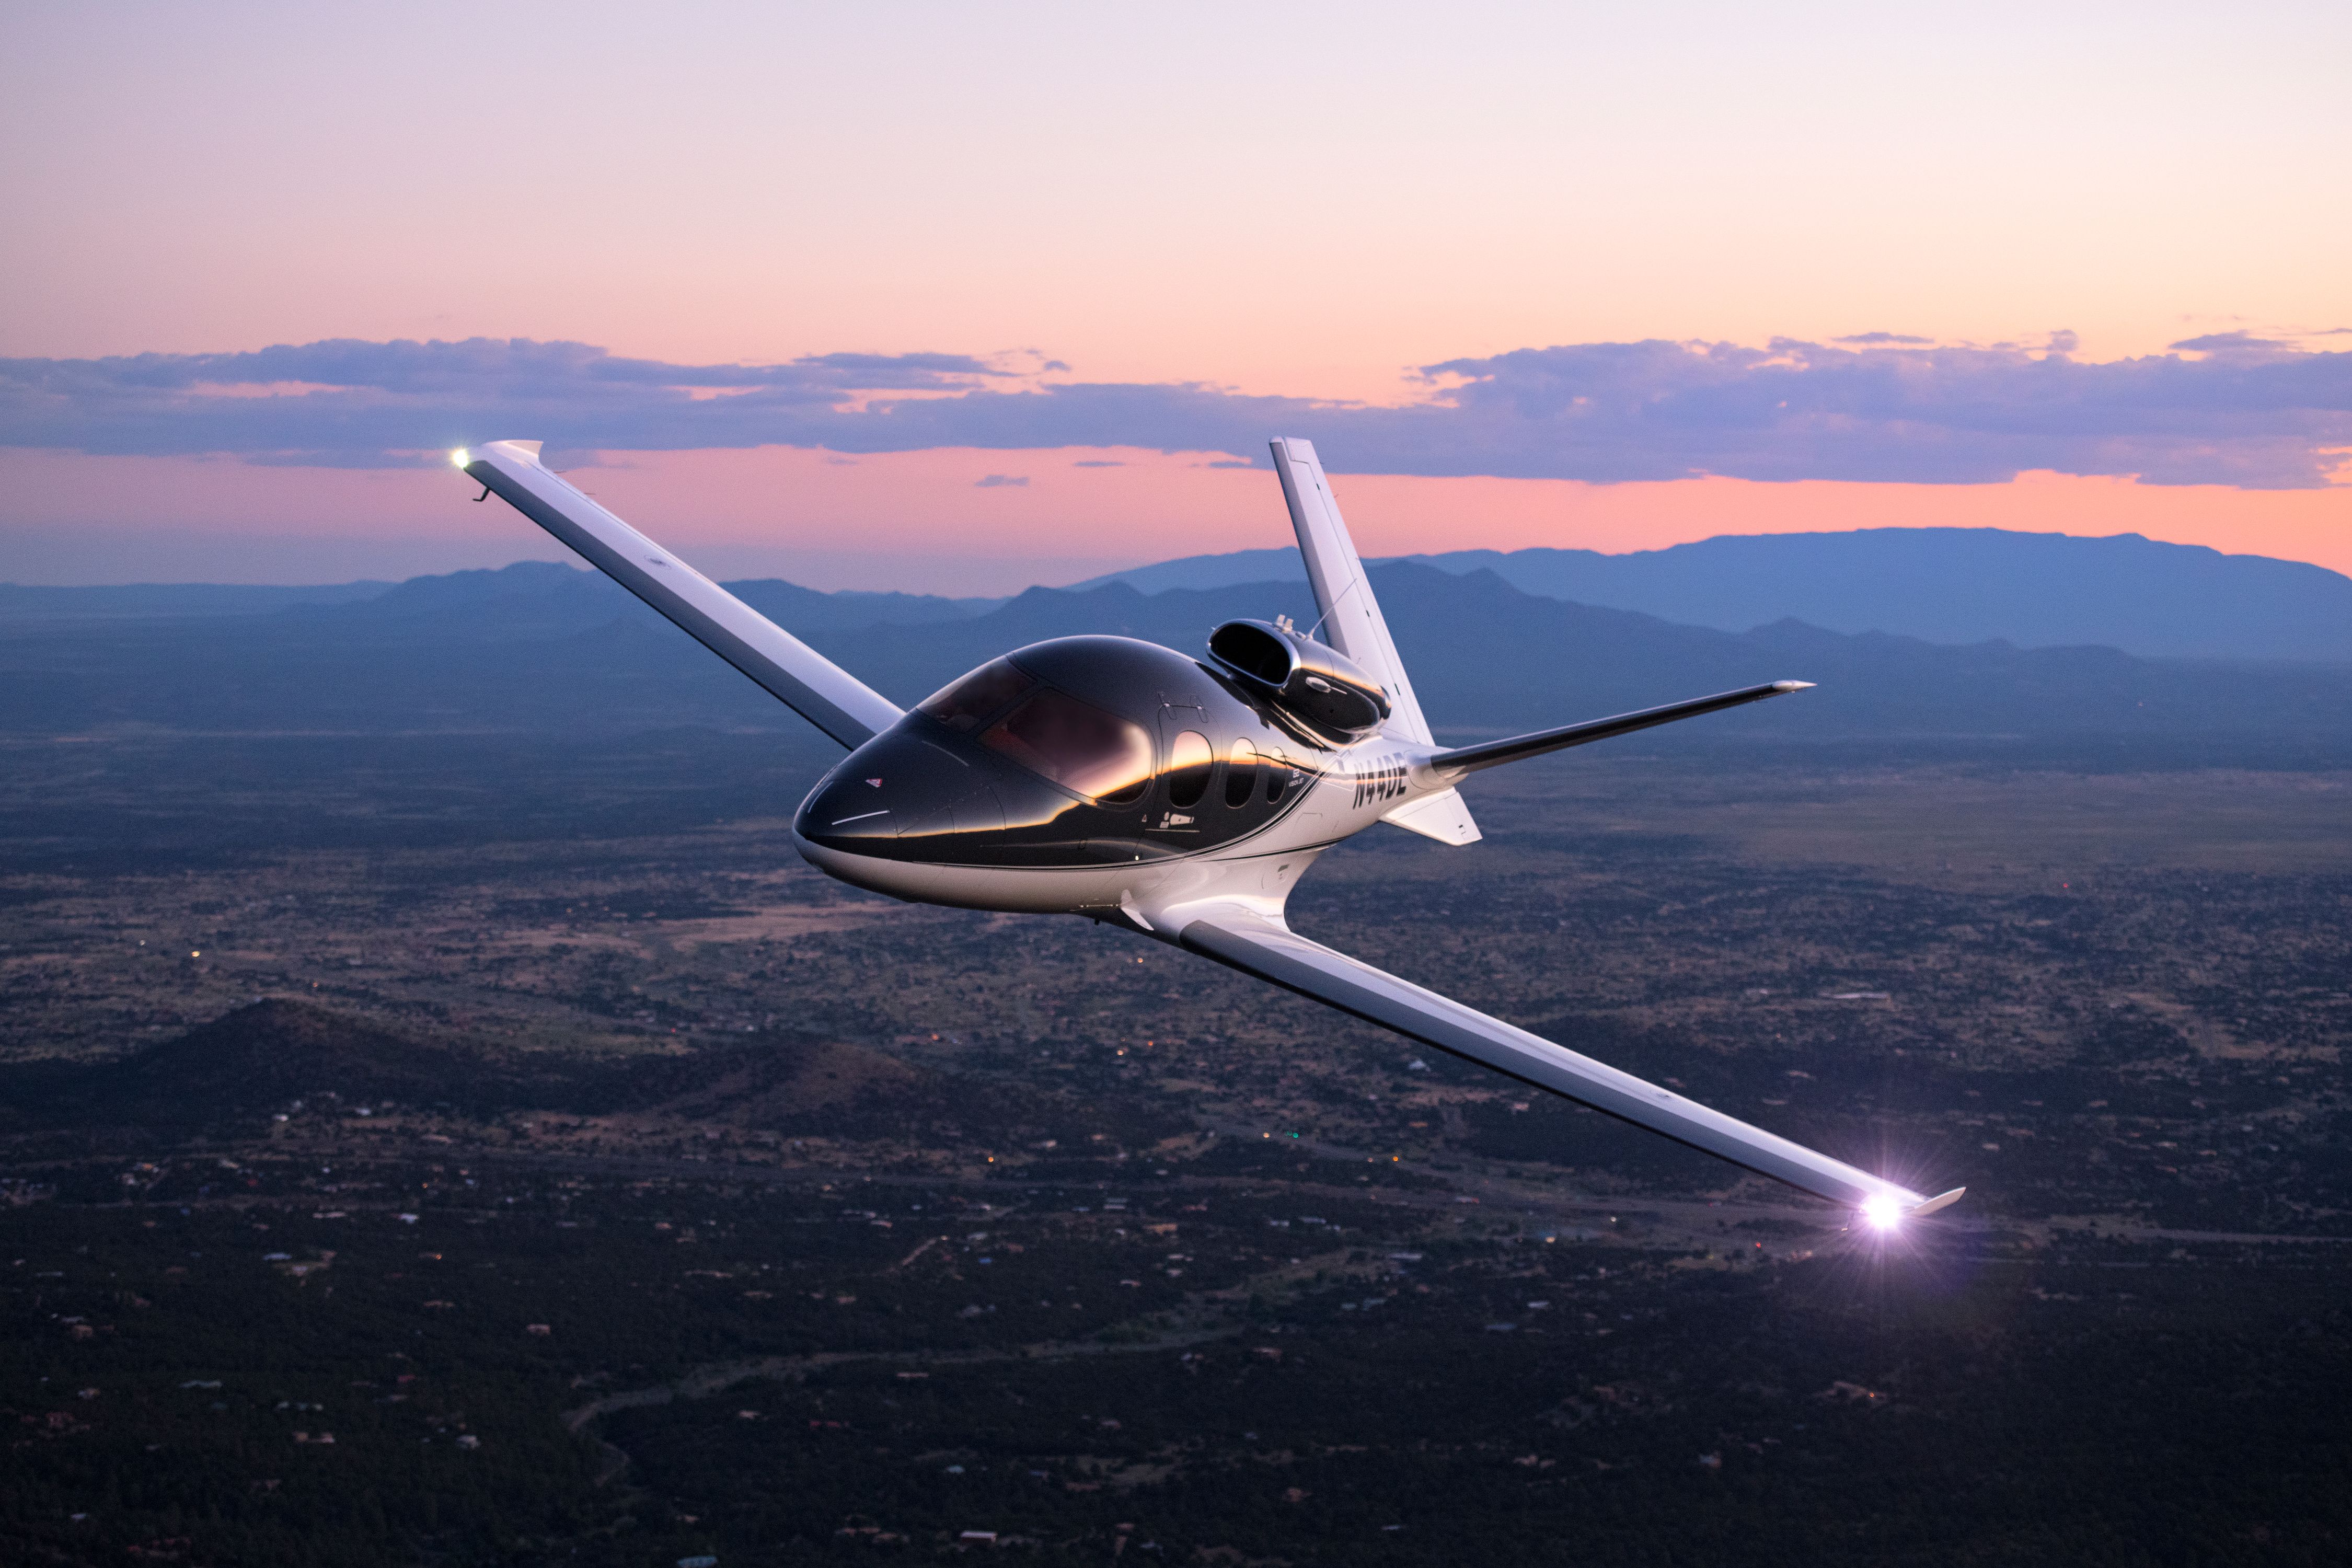 A Cirrus Vision Jet flying in the sky.